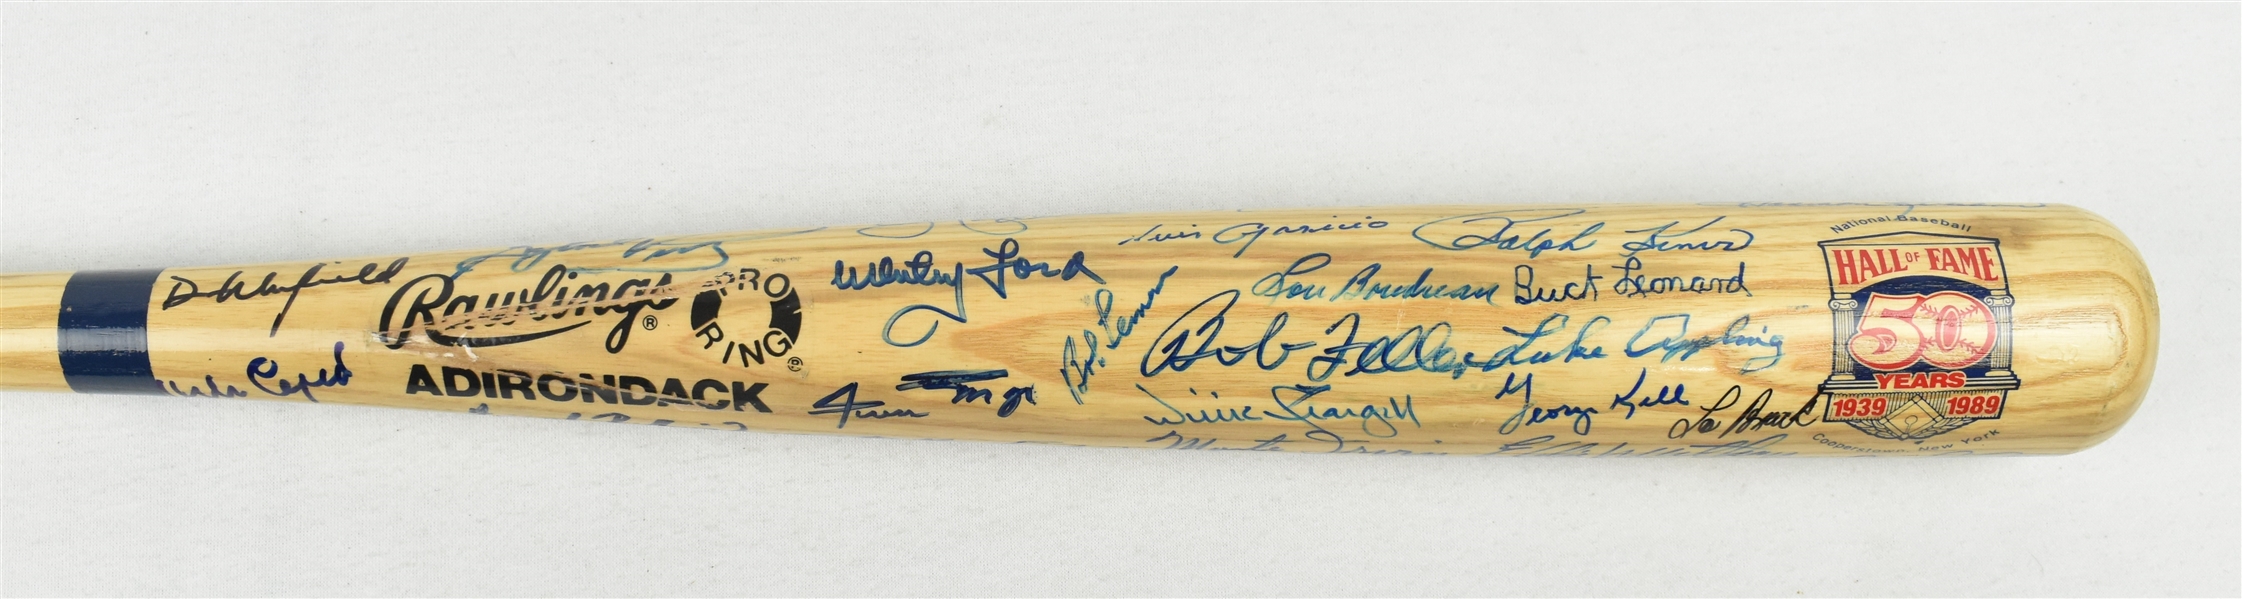 MLB Hall of Fame Autographed Bat w/51 Signatures 